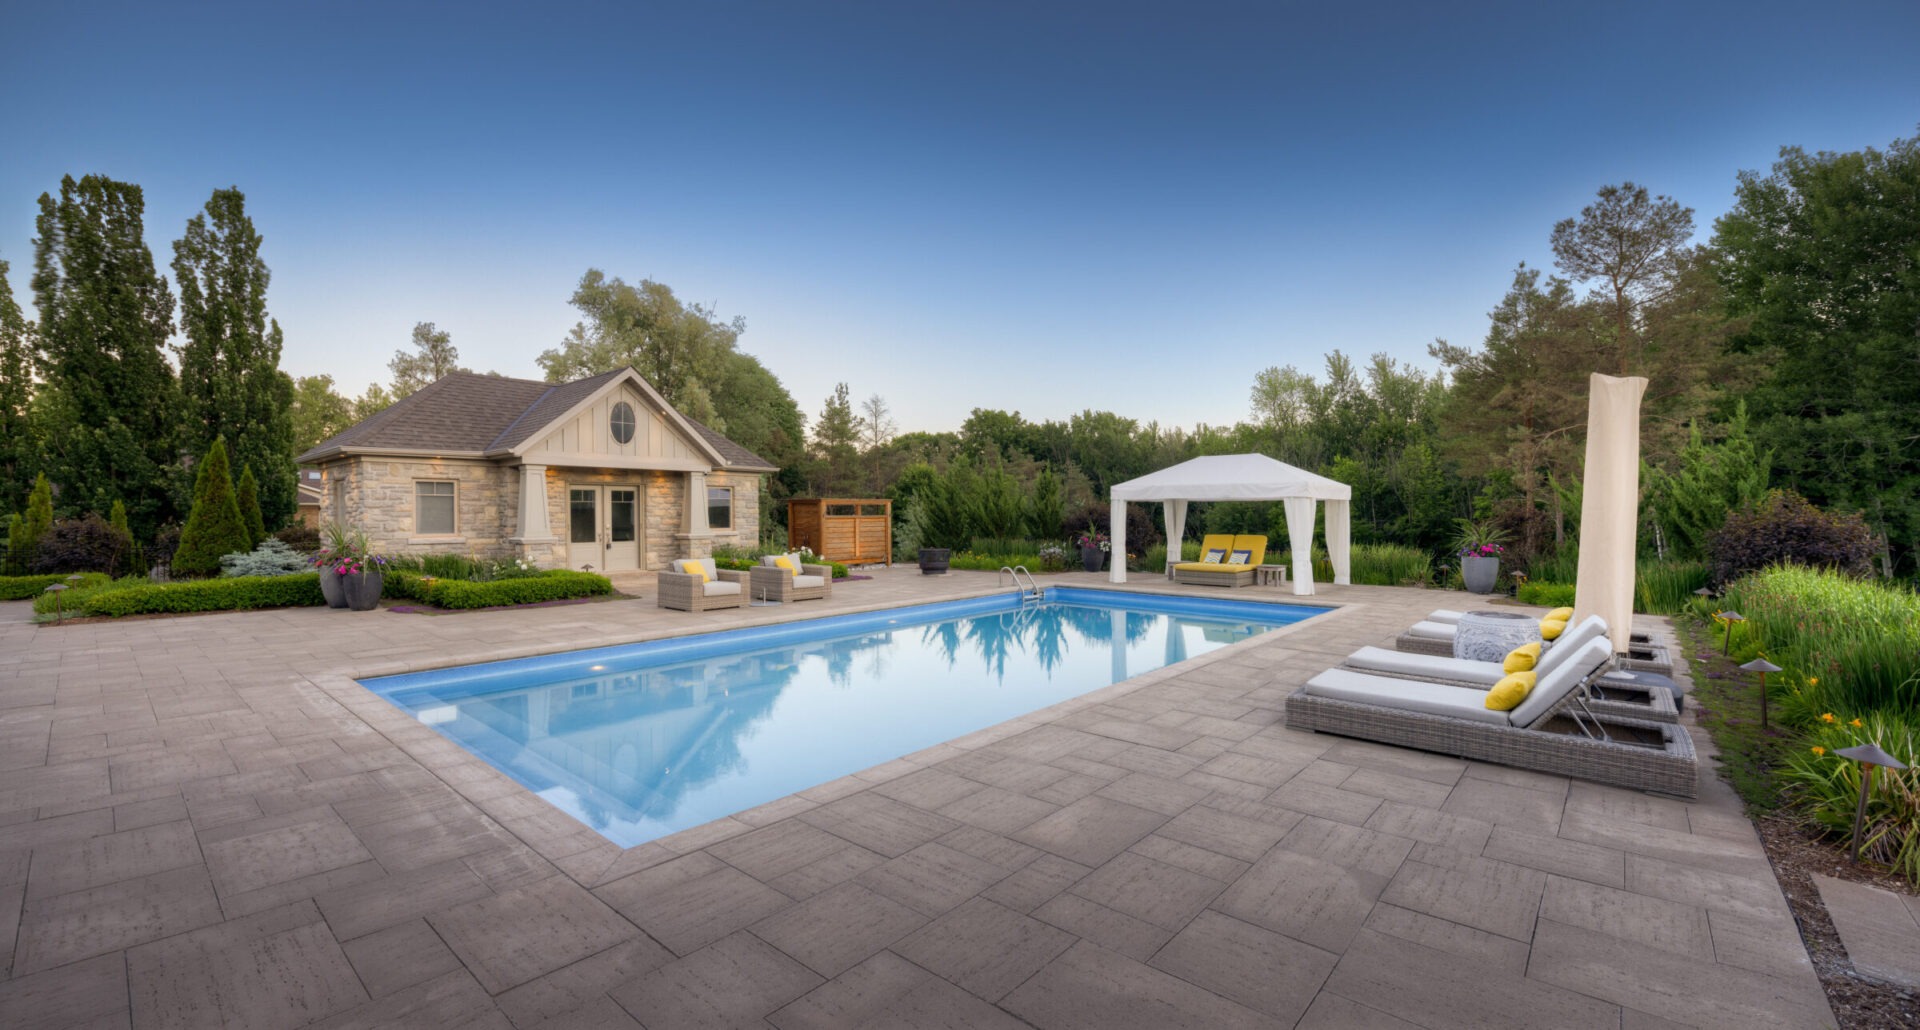 A tranquil backyard setting featuring a clear swimming pool, elegant loungers, a gazebo, lush landscaping, and a stone-clad house under a blue sky.